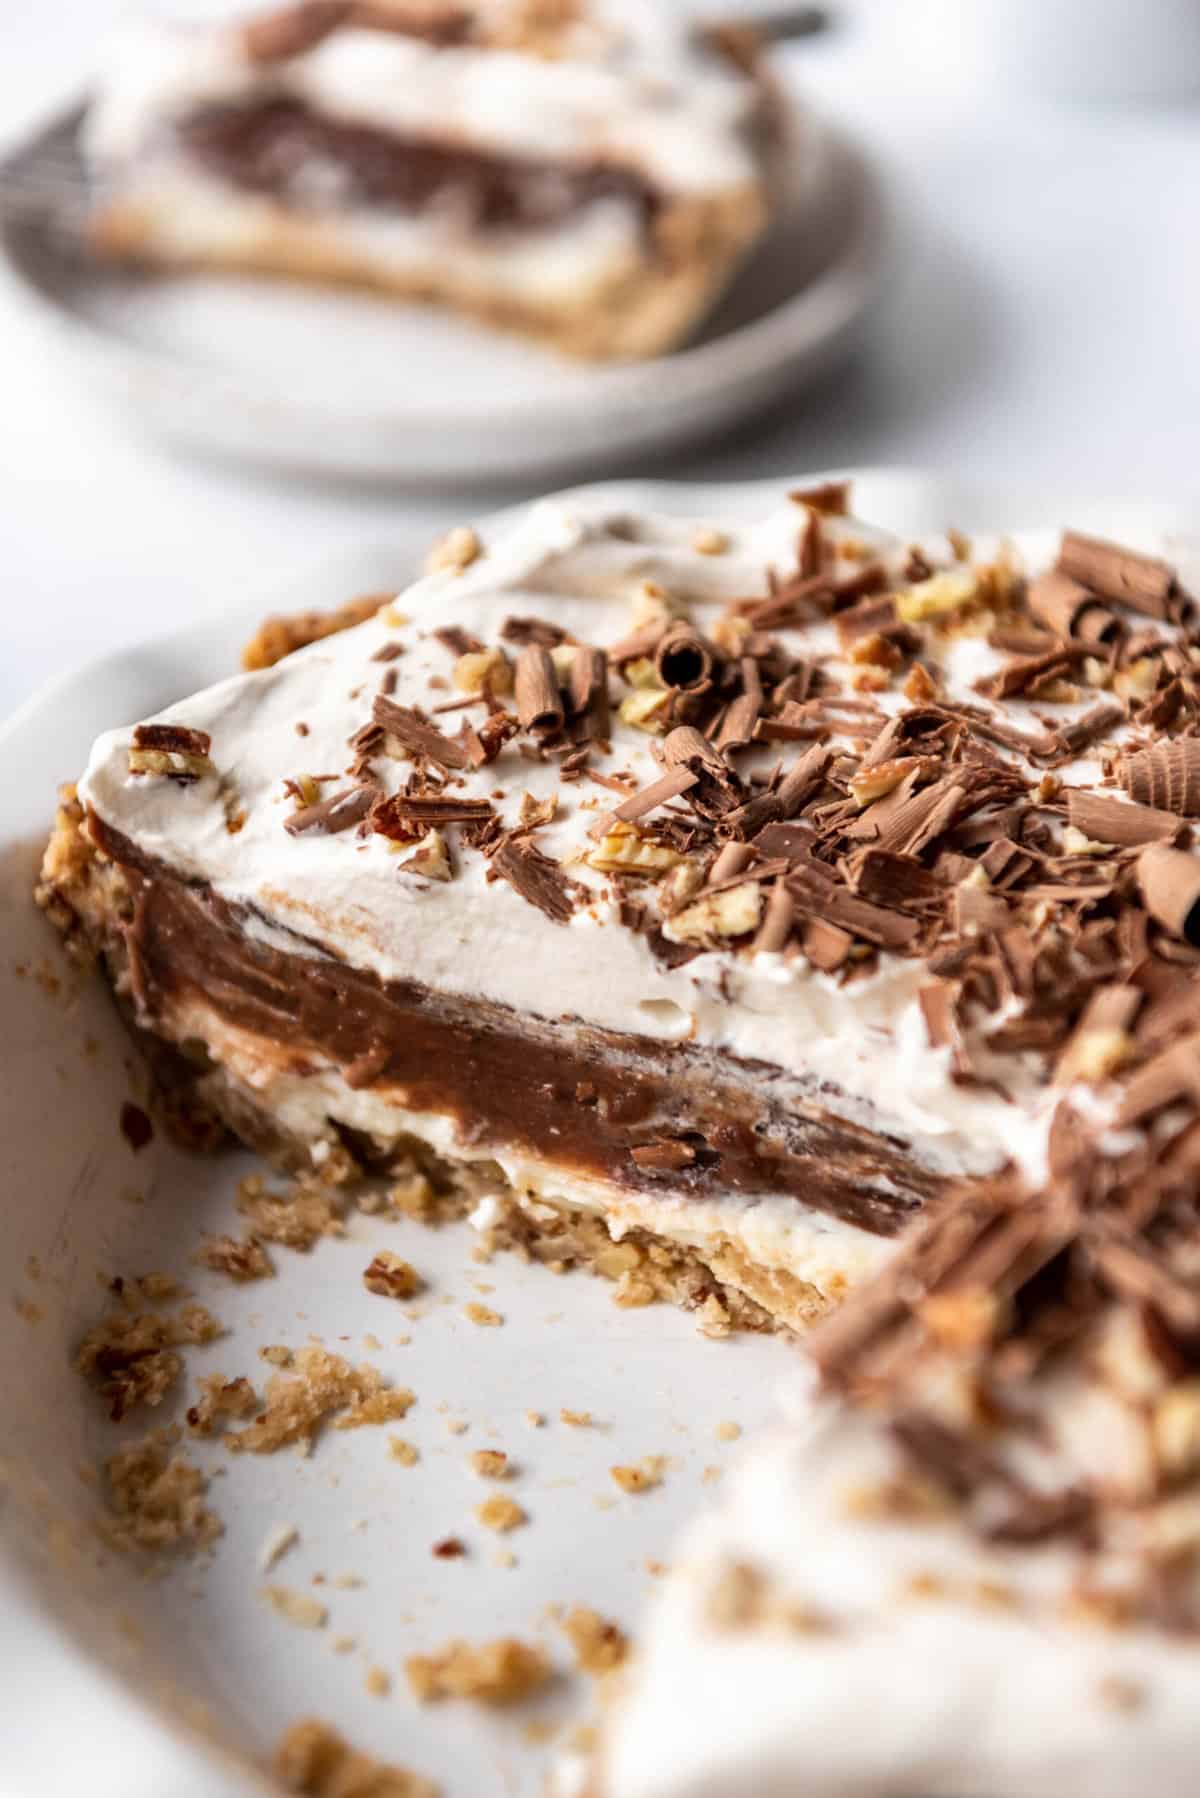 An image of a layered chocolate pie known as possum pie, made from scratch.